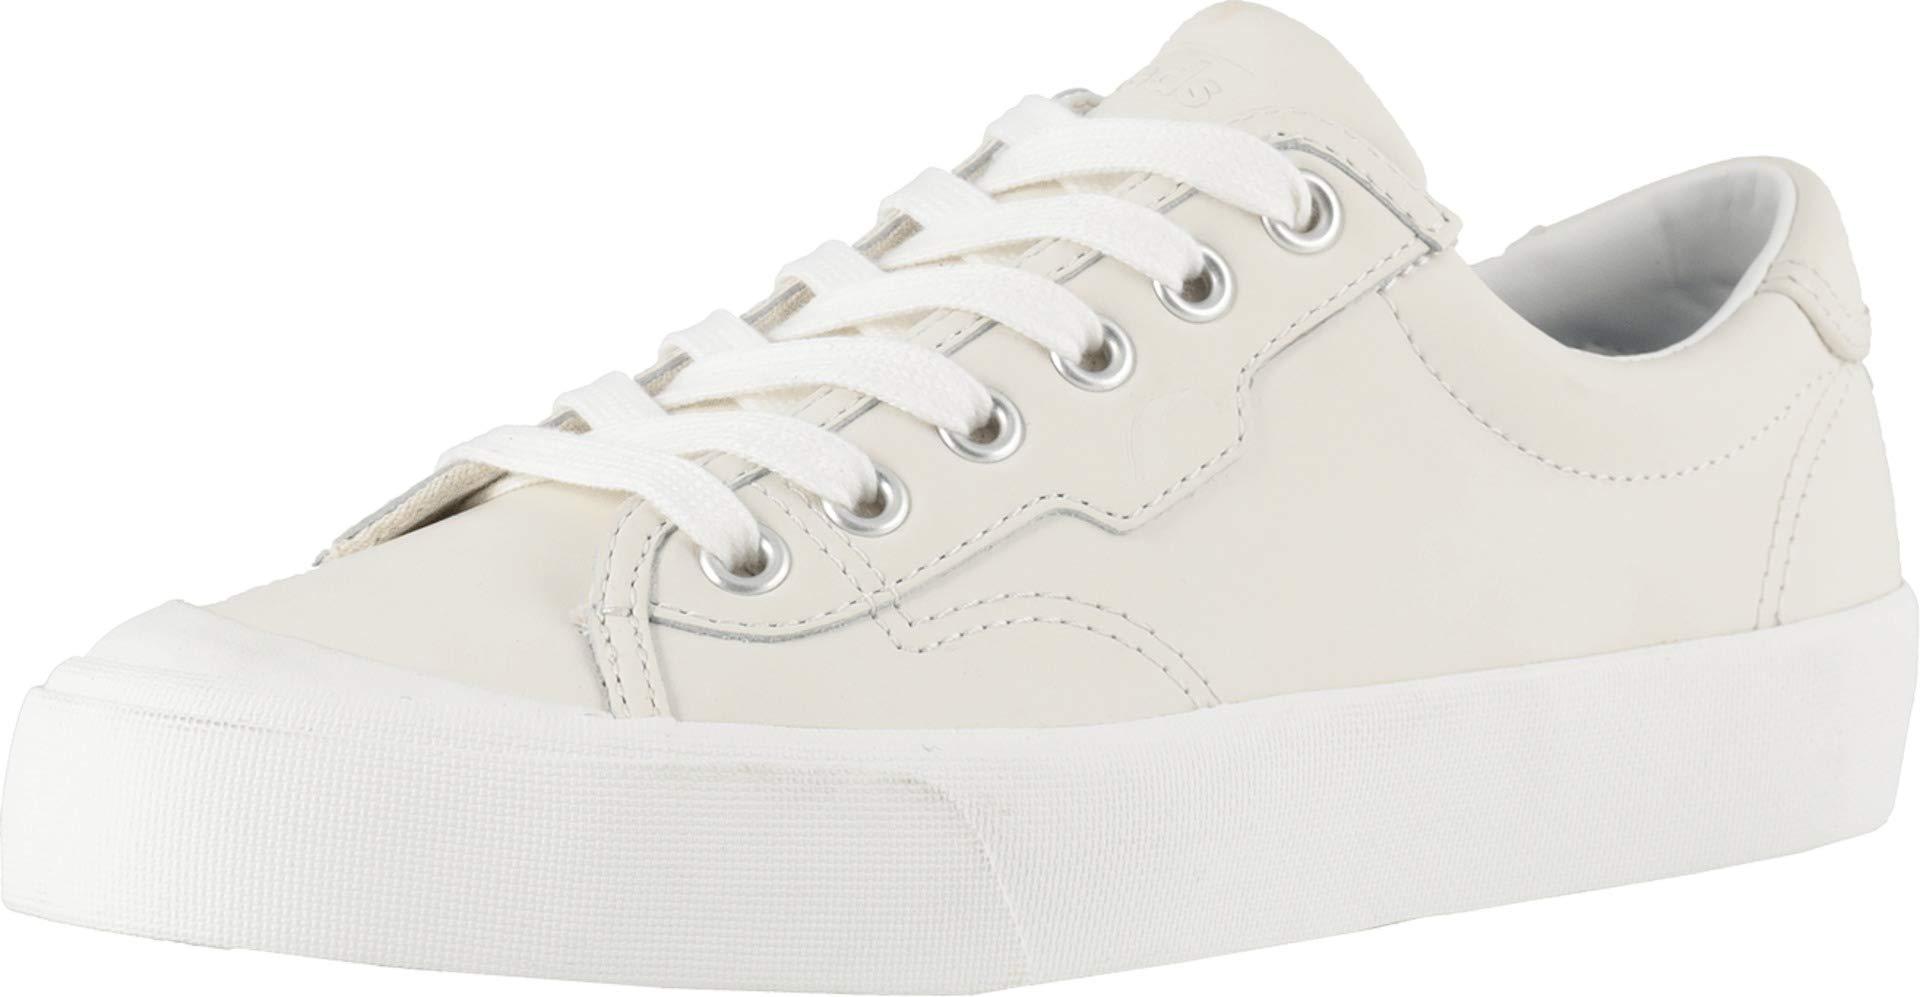 Keds Crew Kick 75 Canvas in White - Lyst